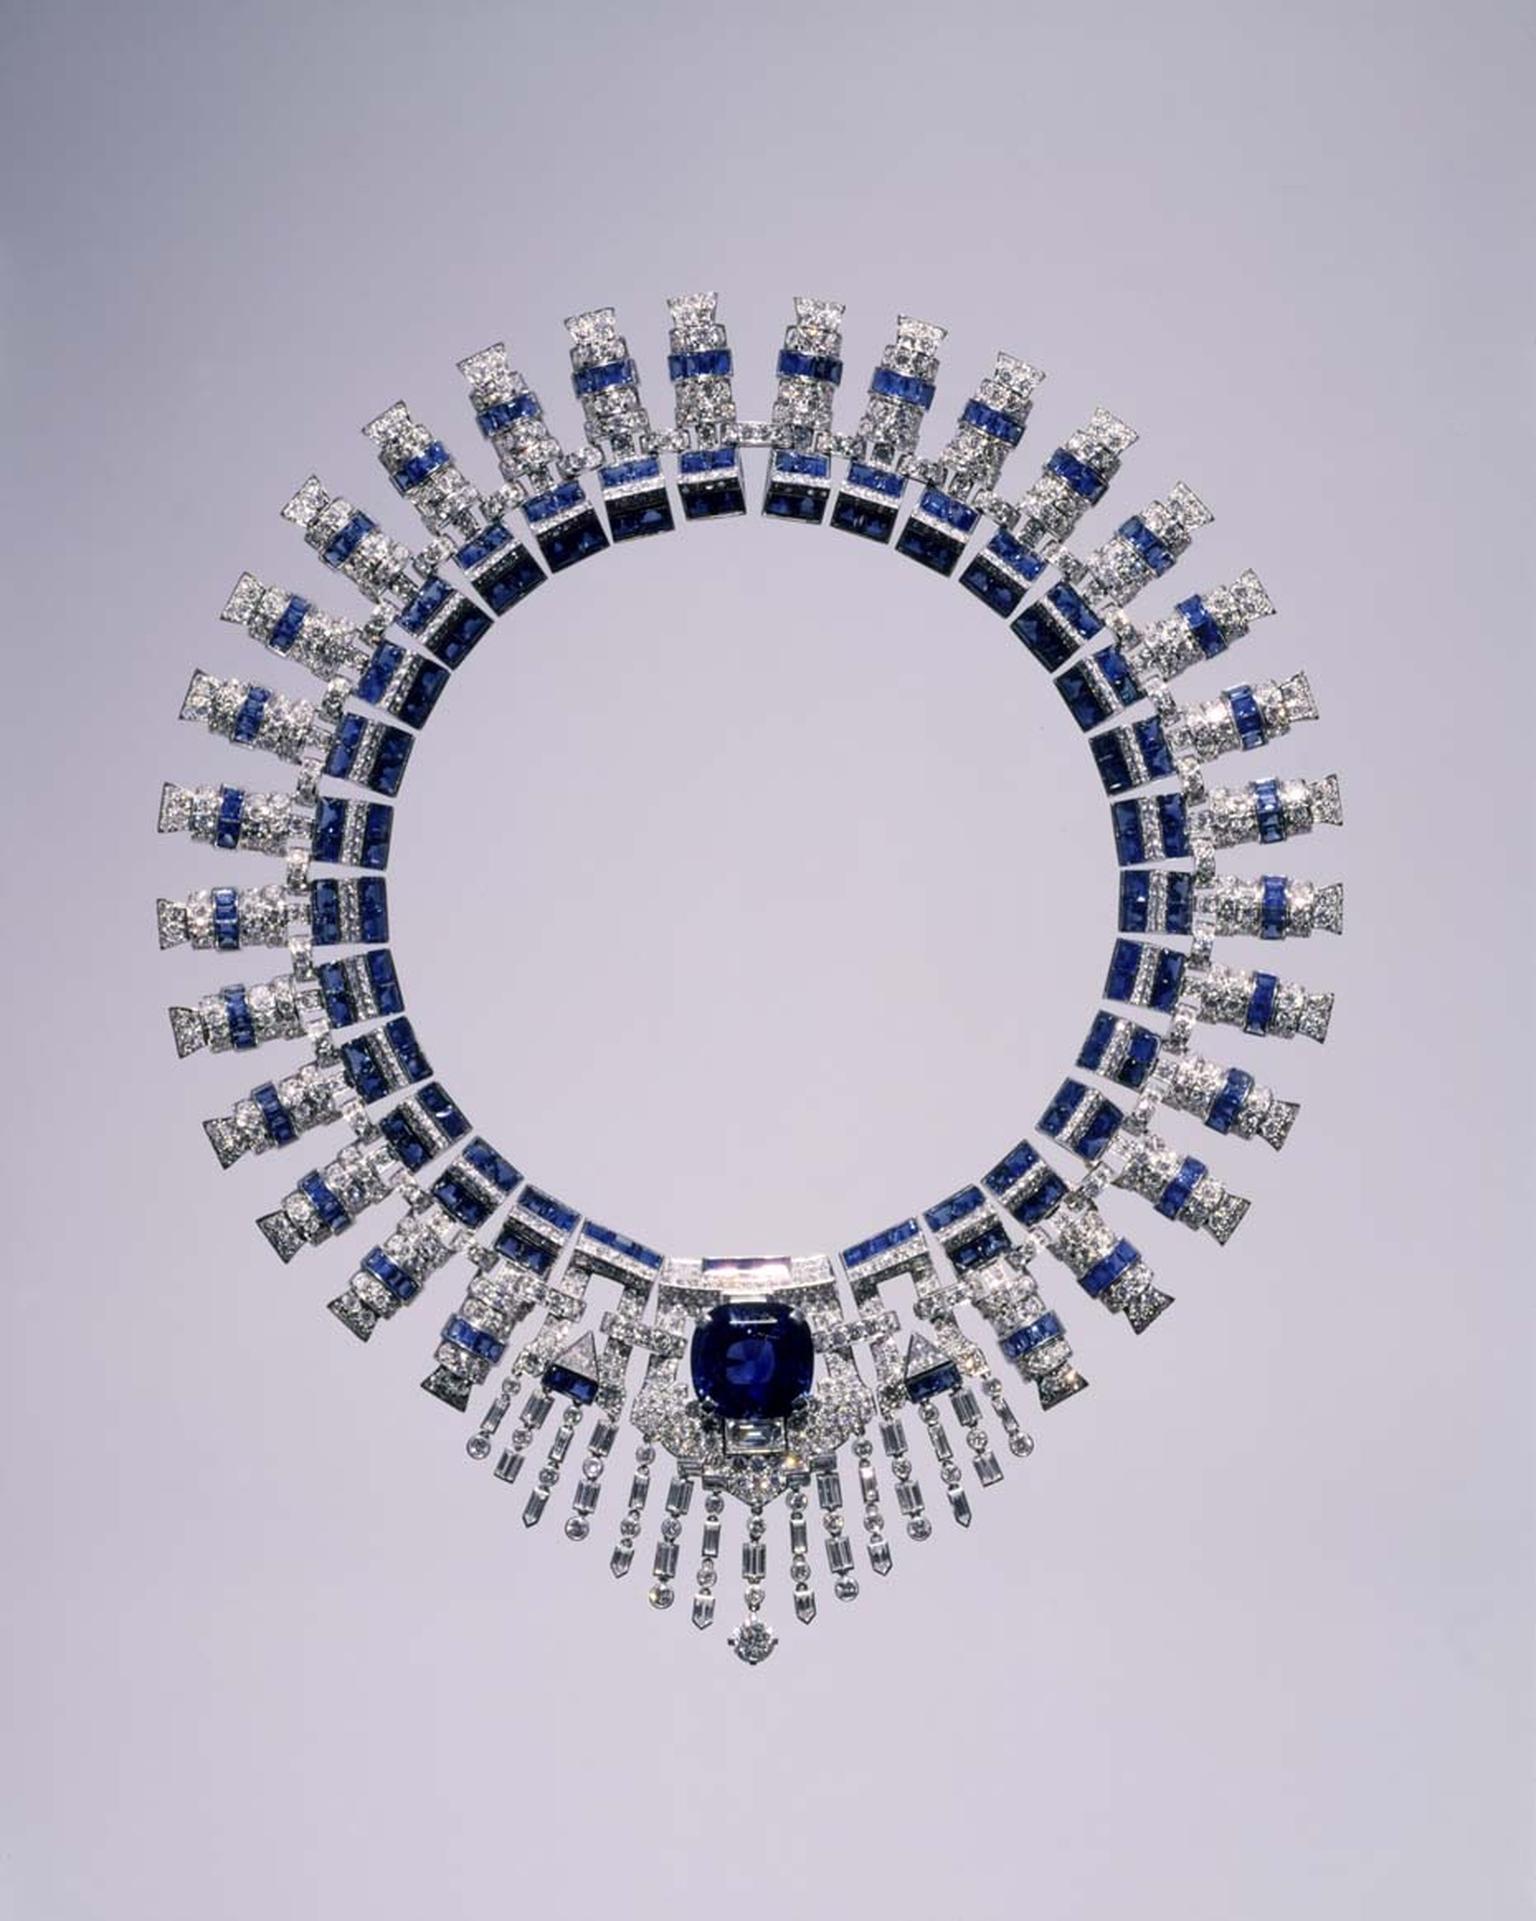 The Cartier necklace with sapphires and diamonds worn by Marjorie Merriweather Post in her portrait. Image: Courtesy Hillwood Estate, Museum and Gardens